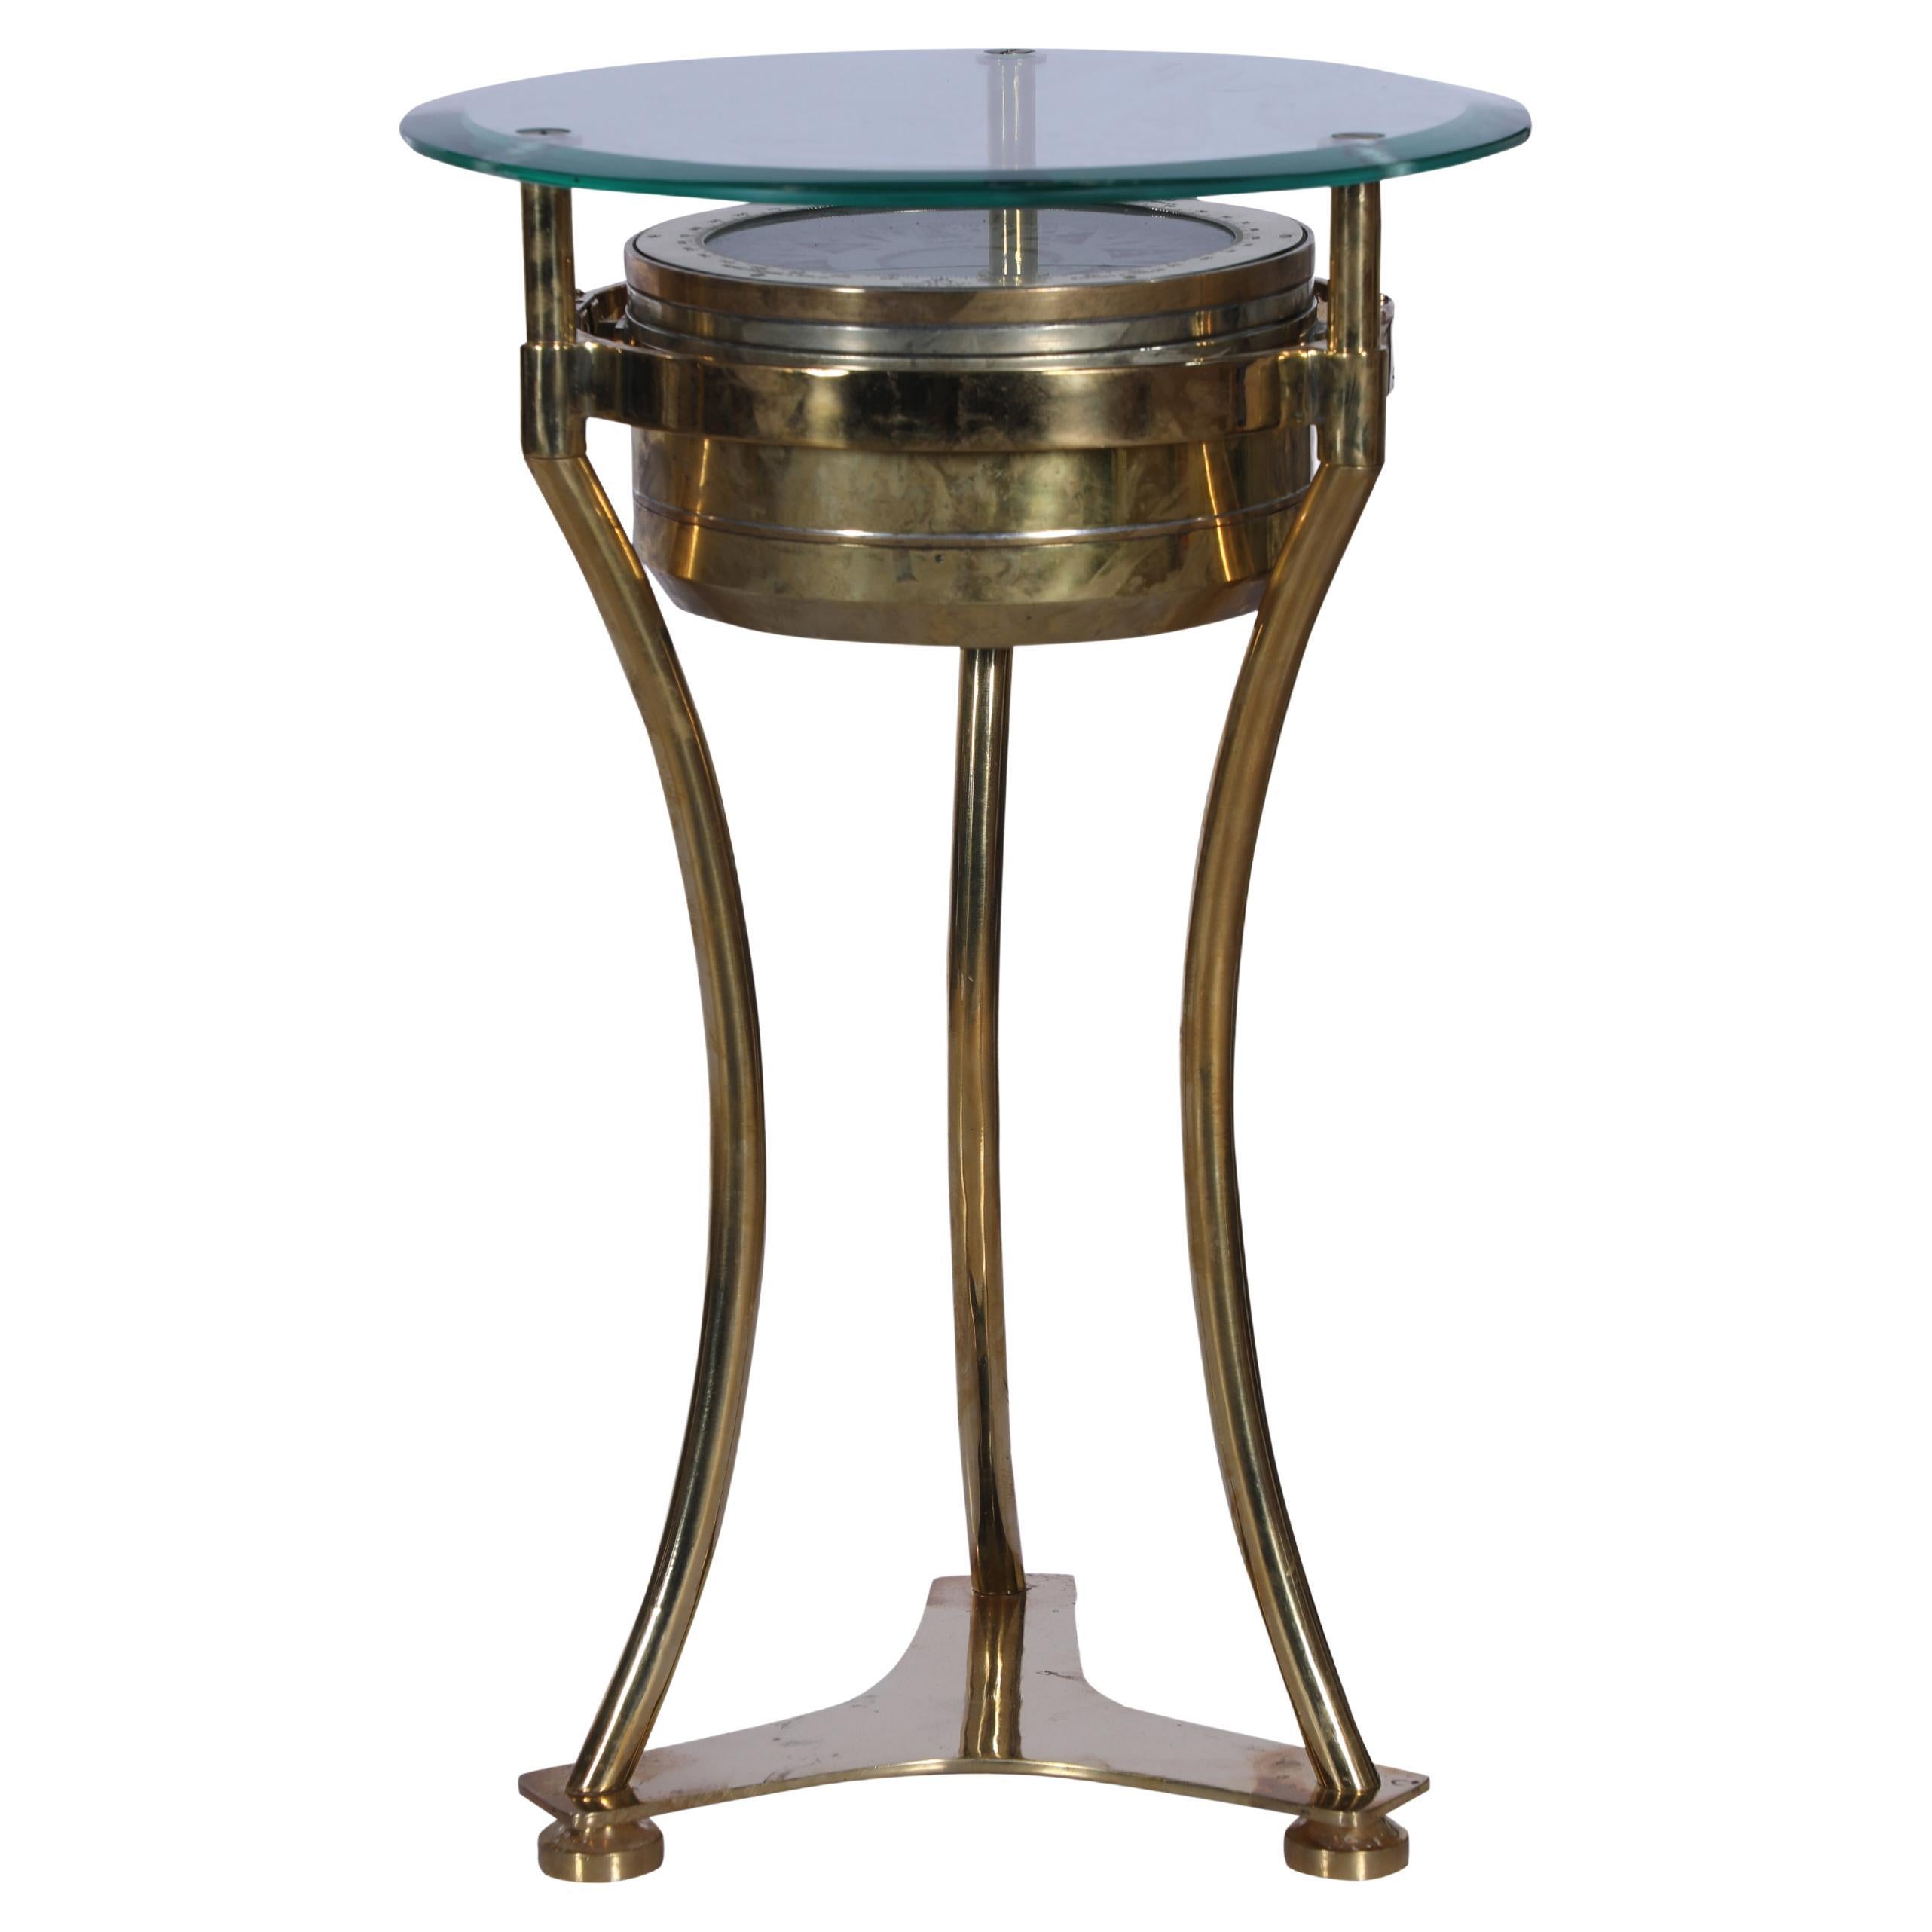 Brass Ship's Compass, Converted to Side Table, English, 1970s